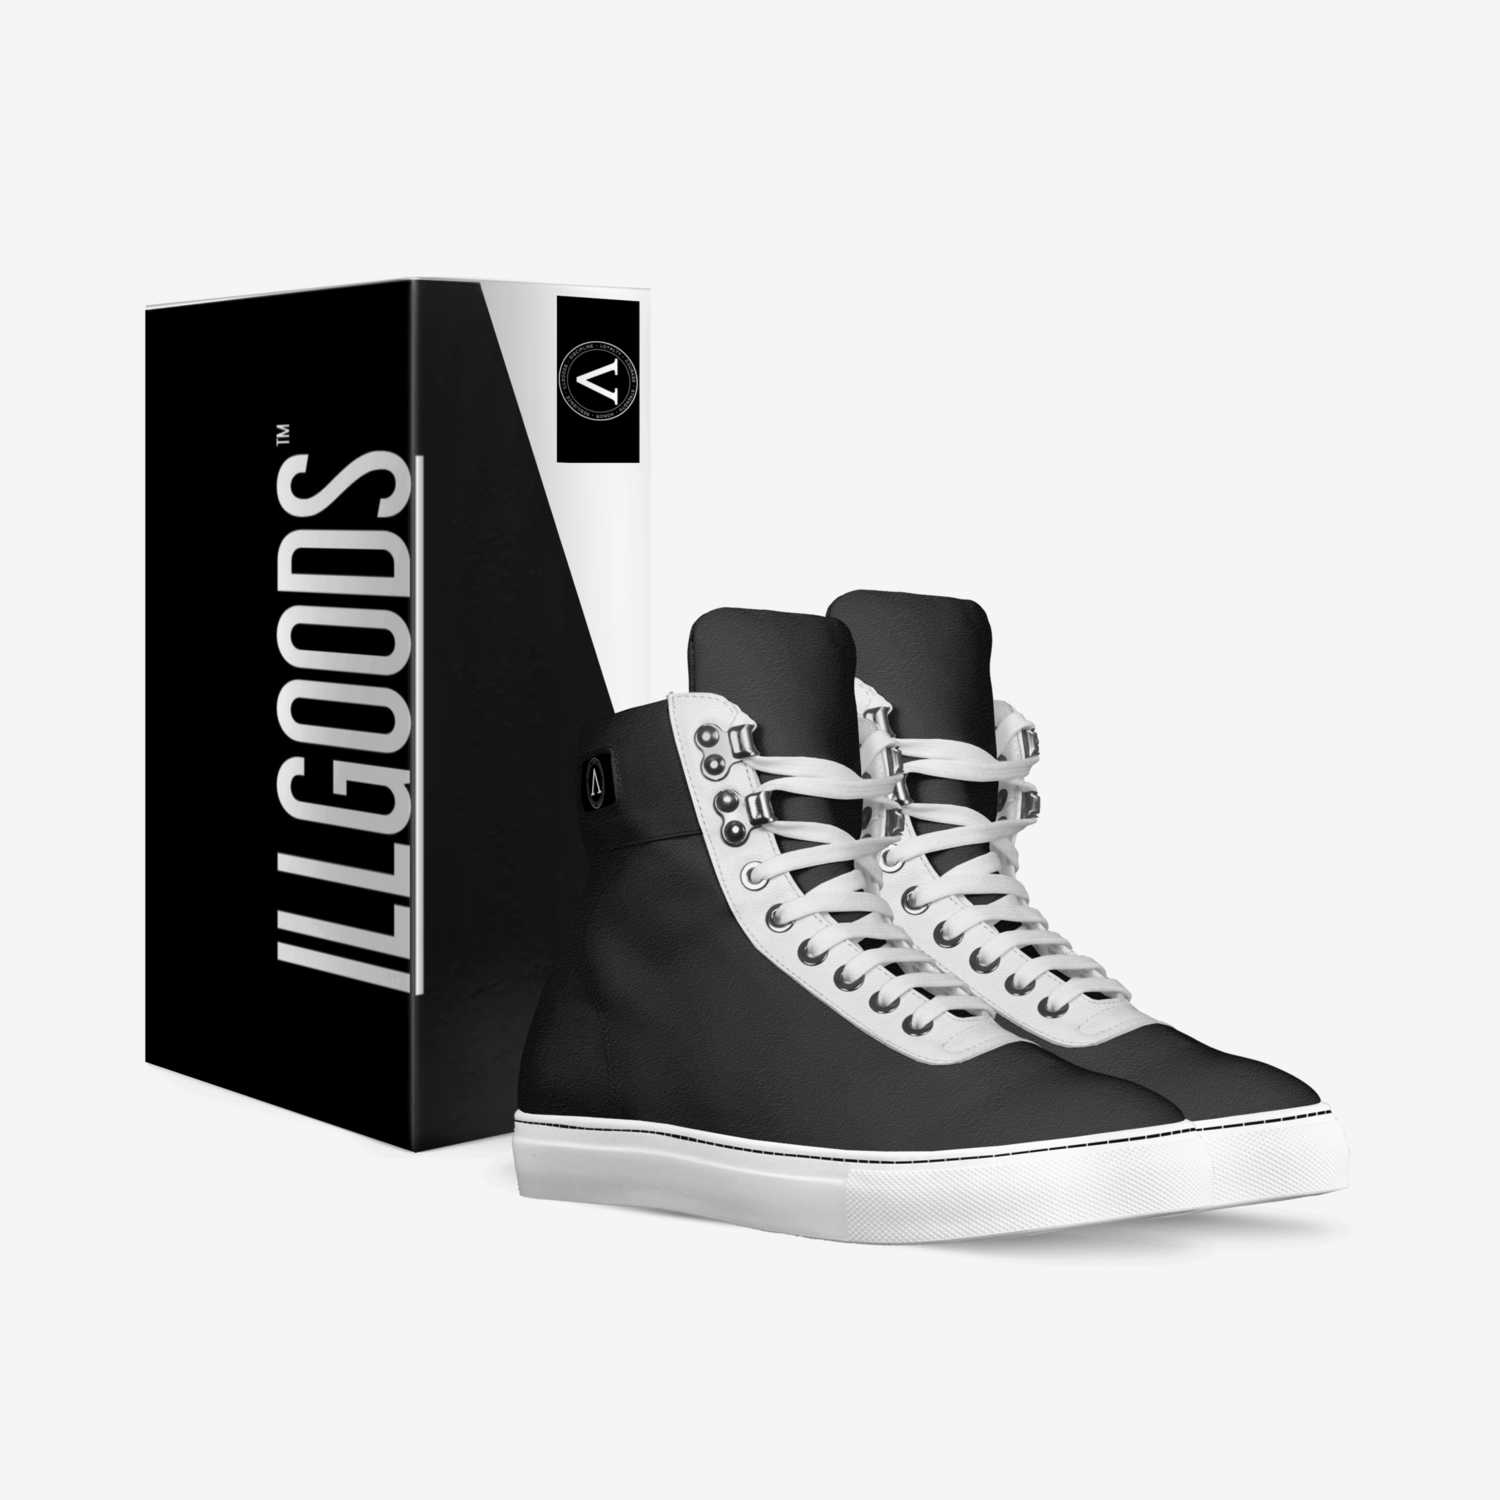 iLLGOODS custom made in Italy shoes by Λge | Box view